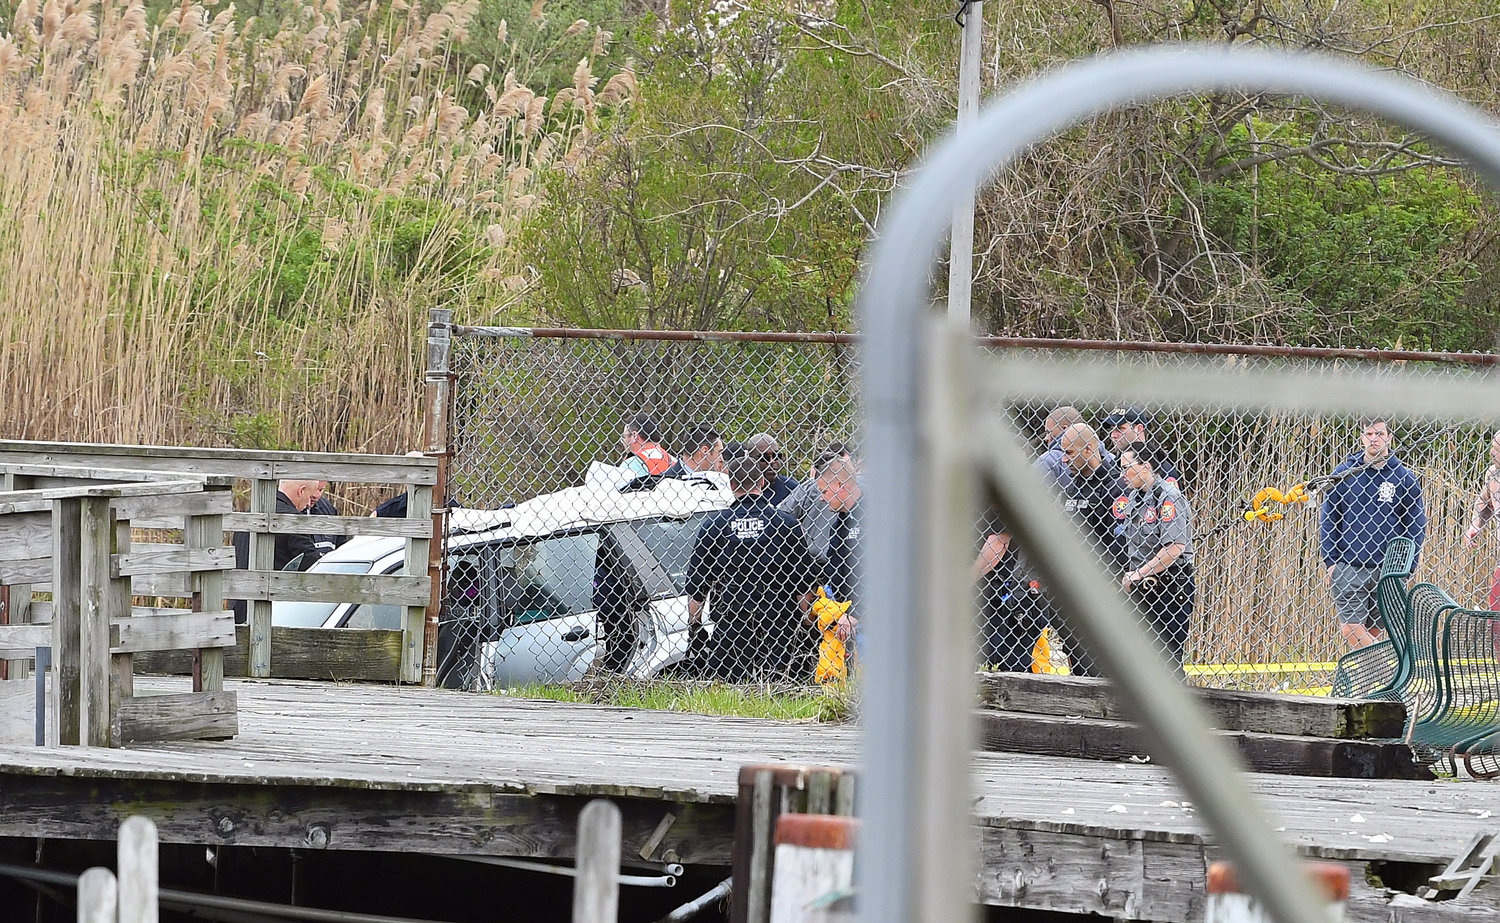 Rescuers hauled out the car that drove into the water off Cow Meadow Park after scuba divers discovered it.